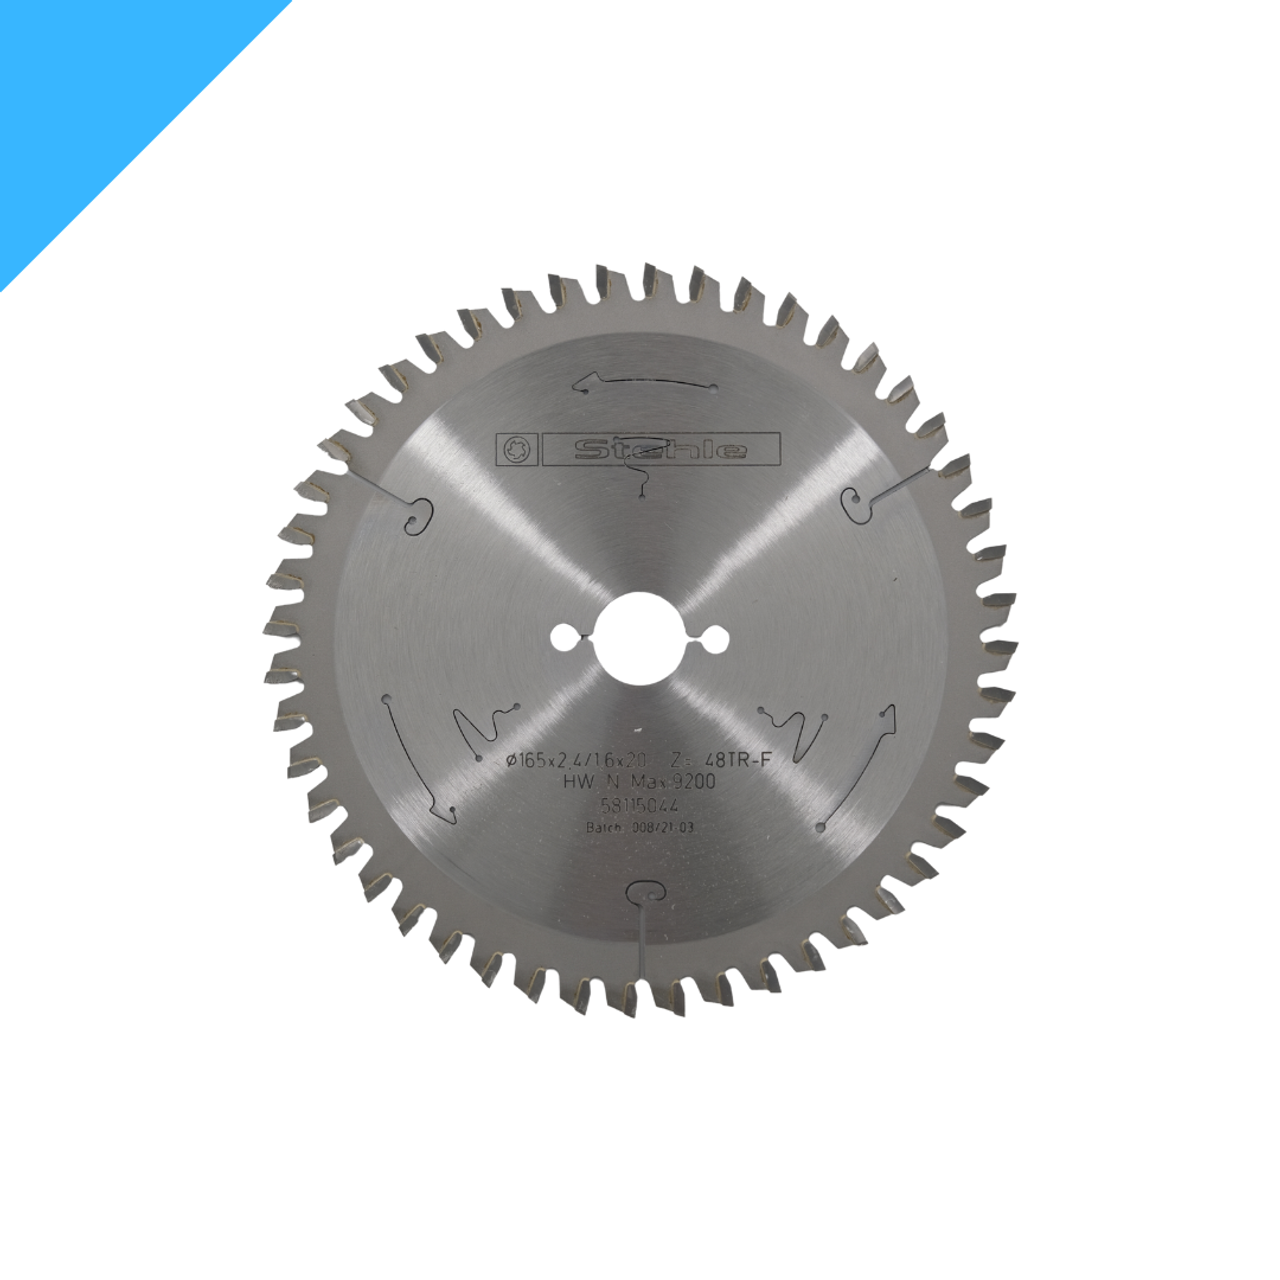 STEHLE Saw Blade HKS PARAT for Aluminium with Aluminium for the Manufacturing Industry and Carpenters in Australia and New Zealand